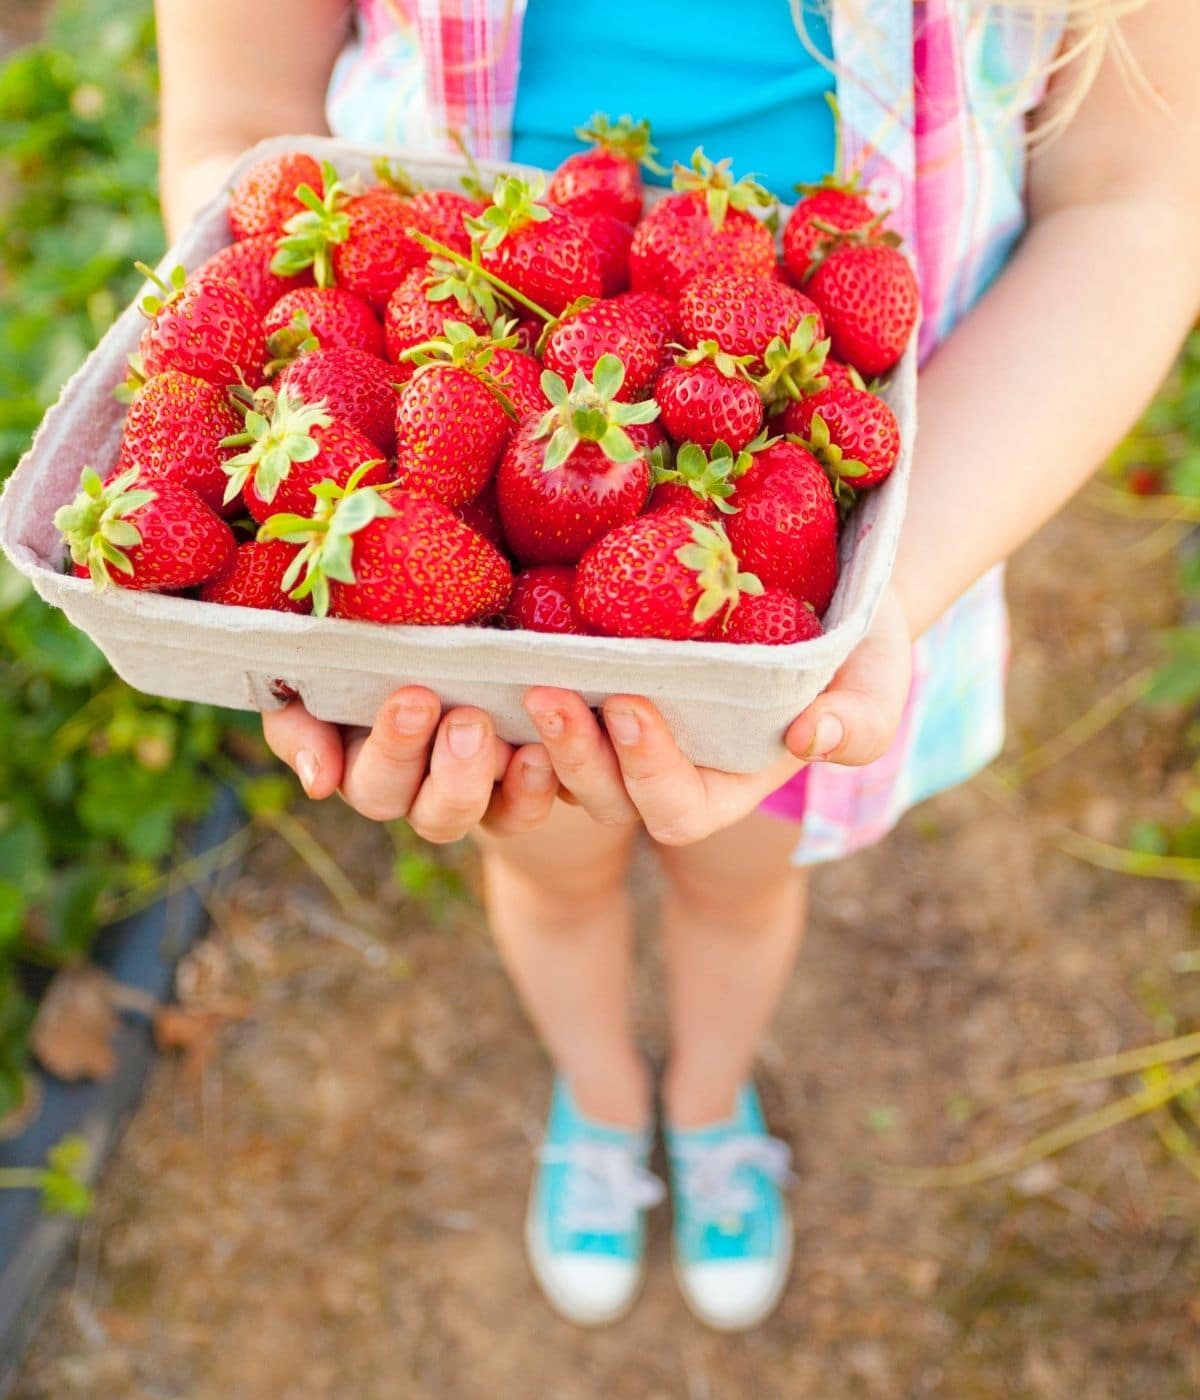 Little girl holding a box of freshly picked strawberries.